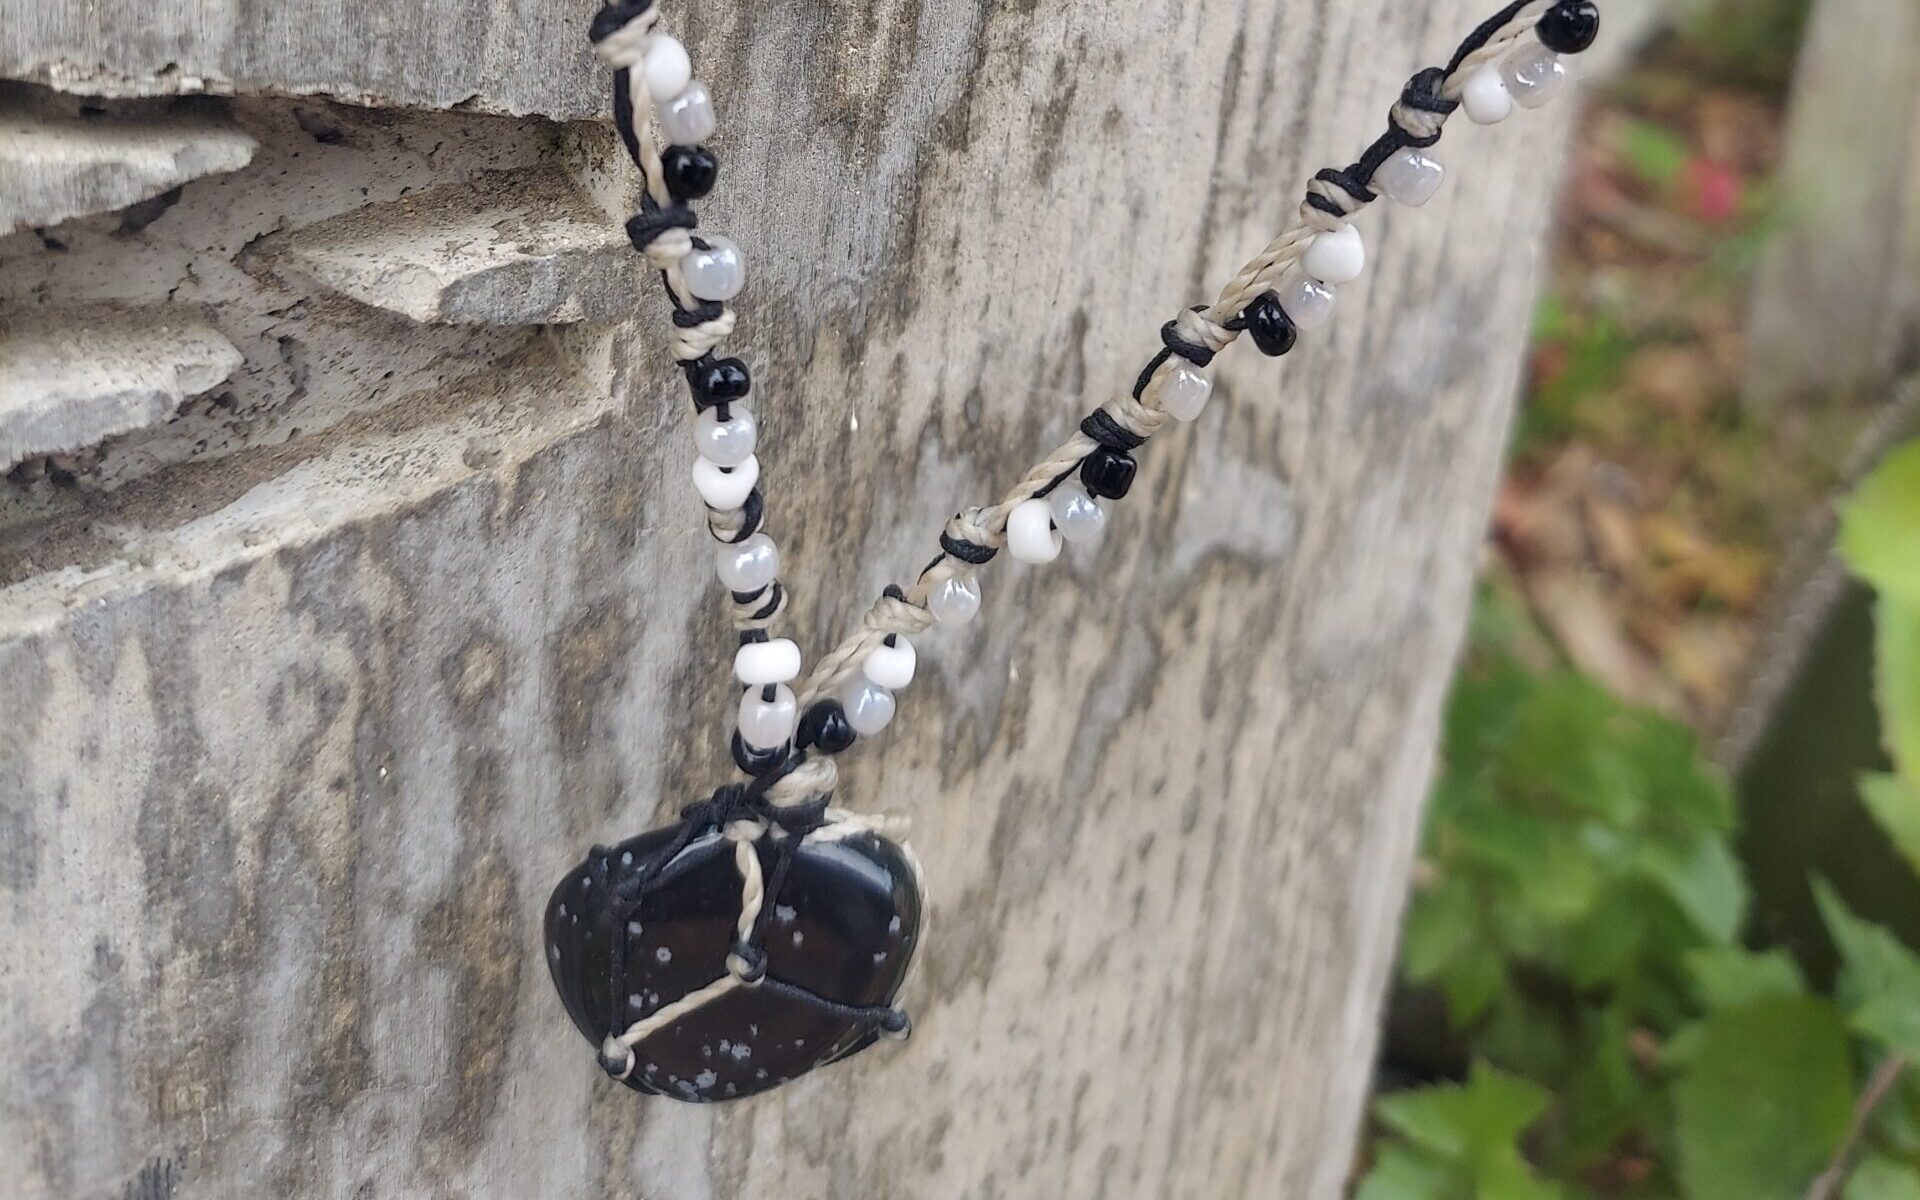 Snowflake Obsidian stone necklace with black and clear beads